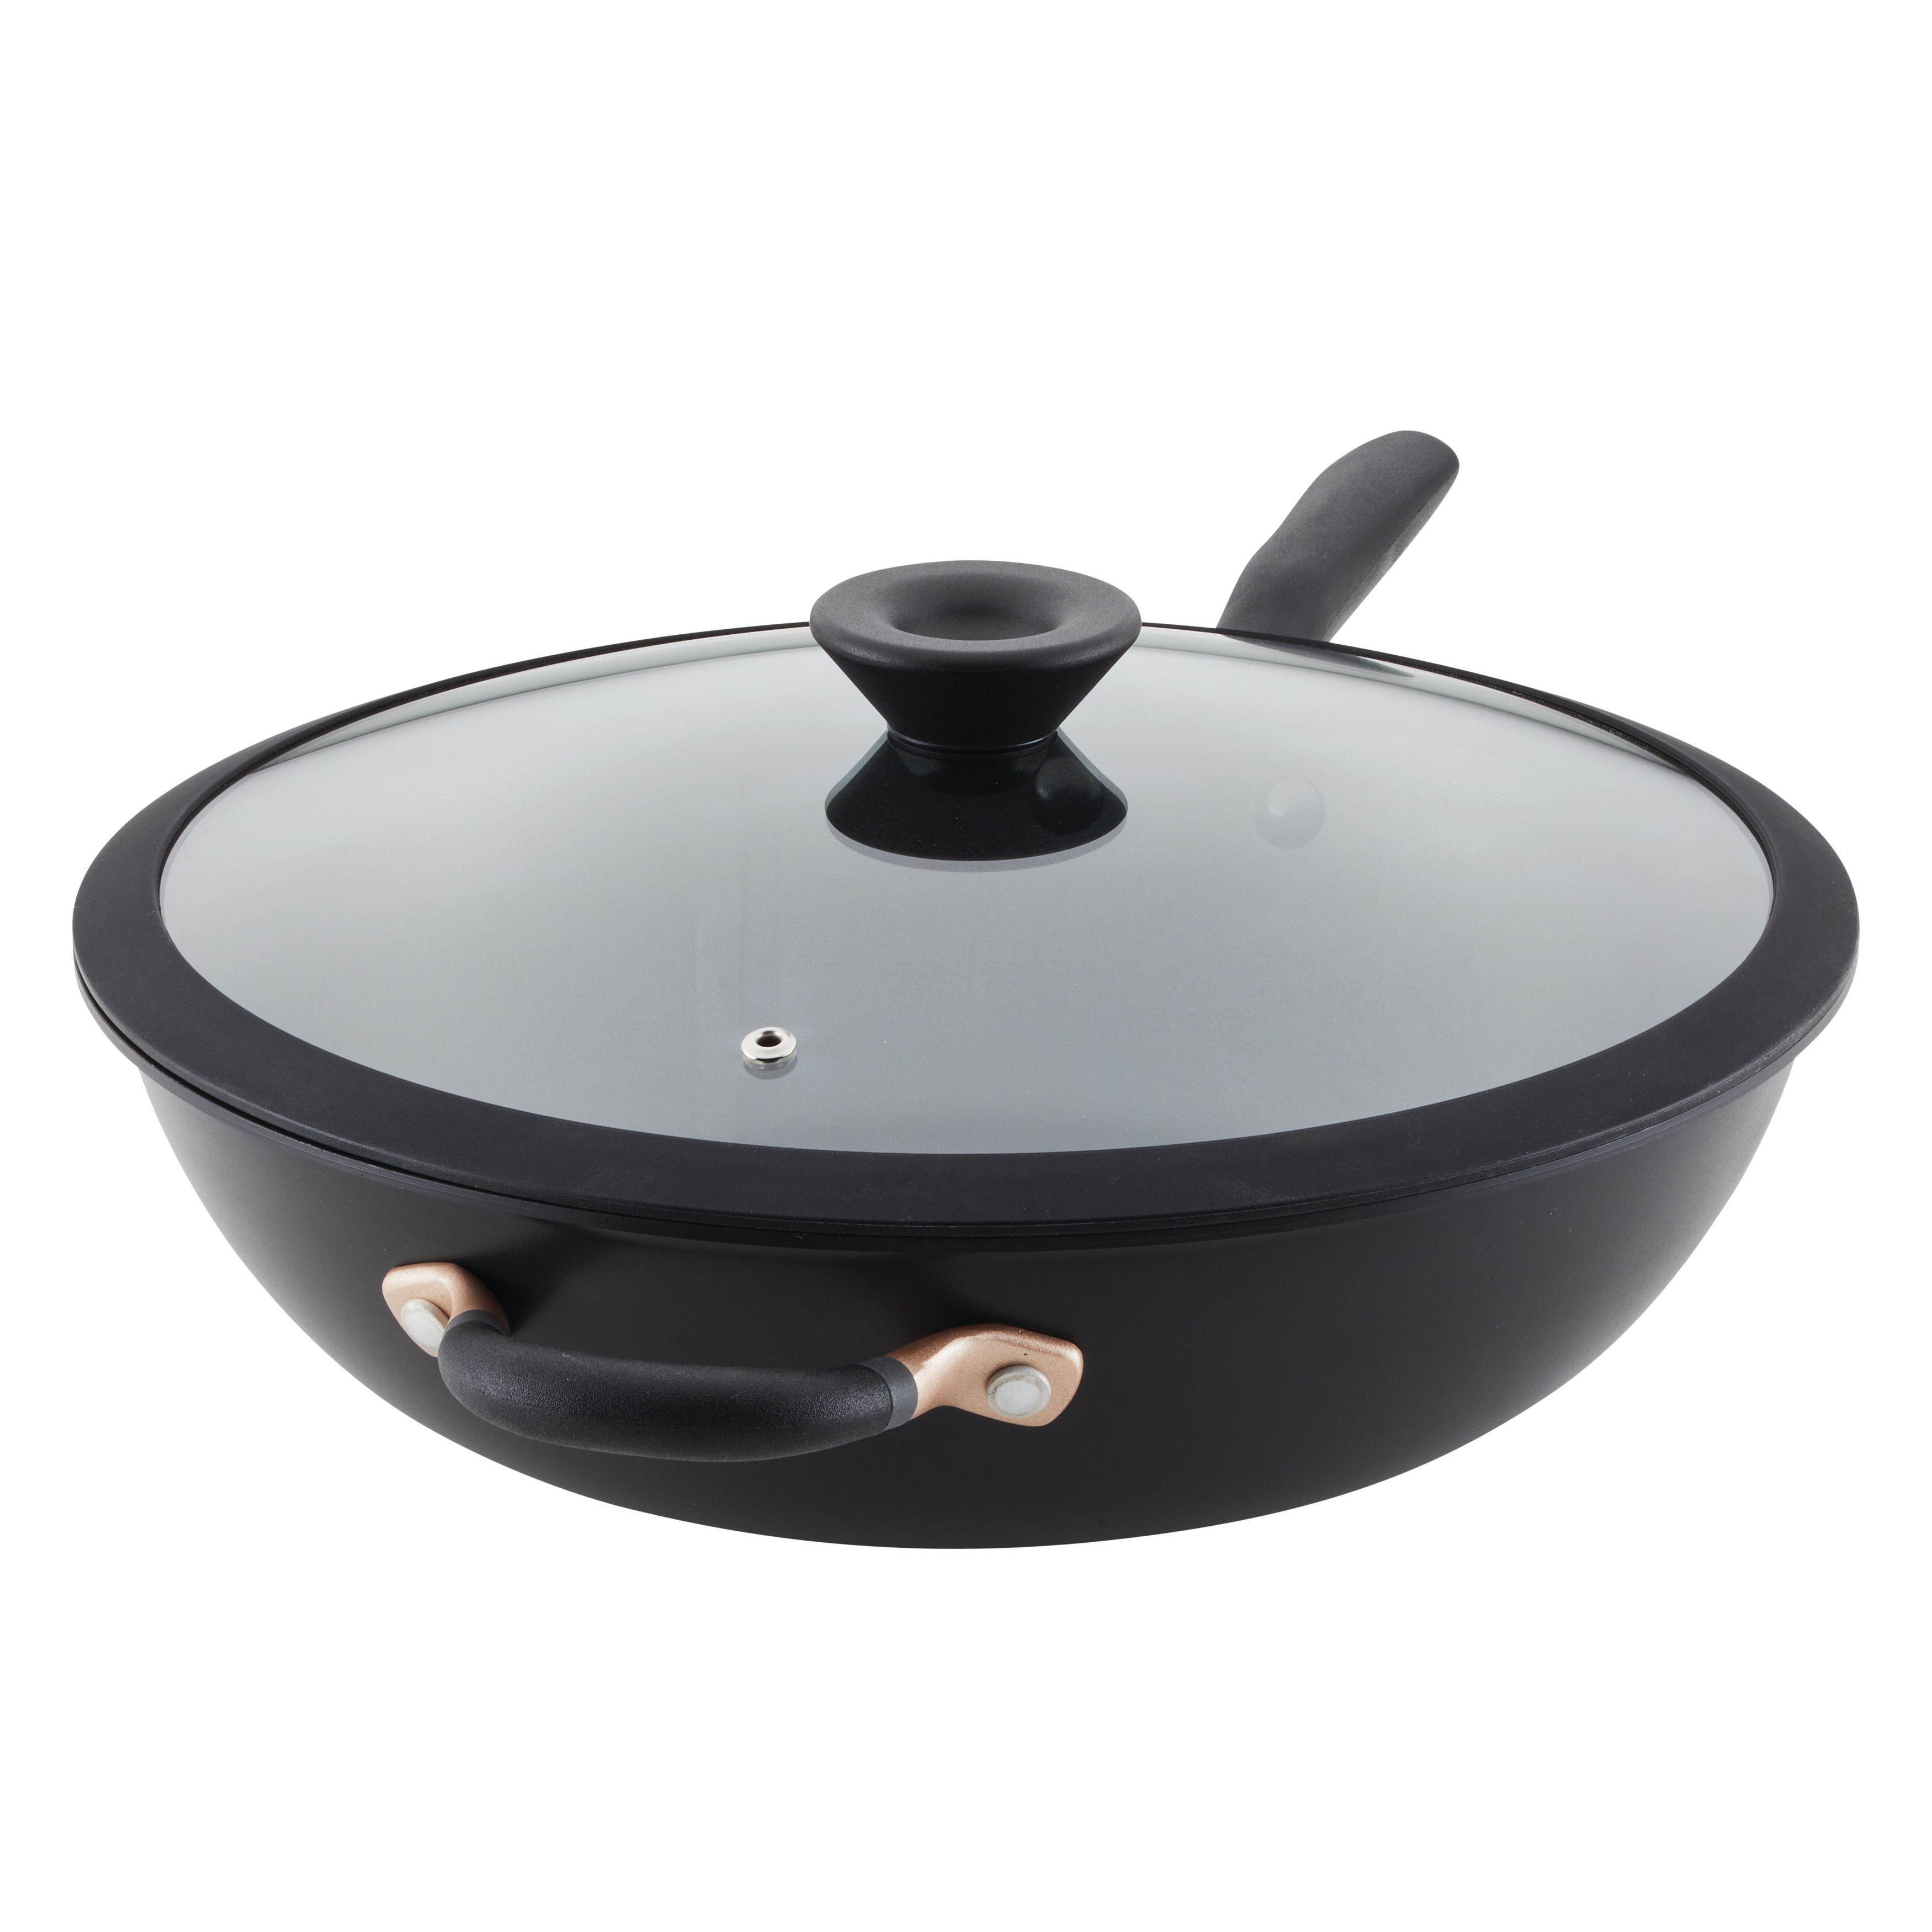 https://ak1.ostkcdn.com/images/products/is/images/direct/ccf0348e095677961fc78a01af6cfffcc391cd26/Meyer-Accent-Series-Hard-Anodized-Nonstick-Induction-Stir-Fry-Pan-with-Helper-Handle-and-Glass-Lid%2C-12.75-Inch%2C-Matte-Black.jpg